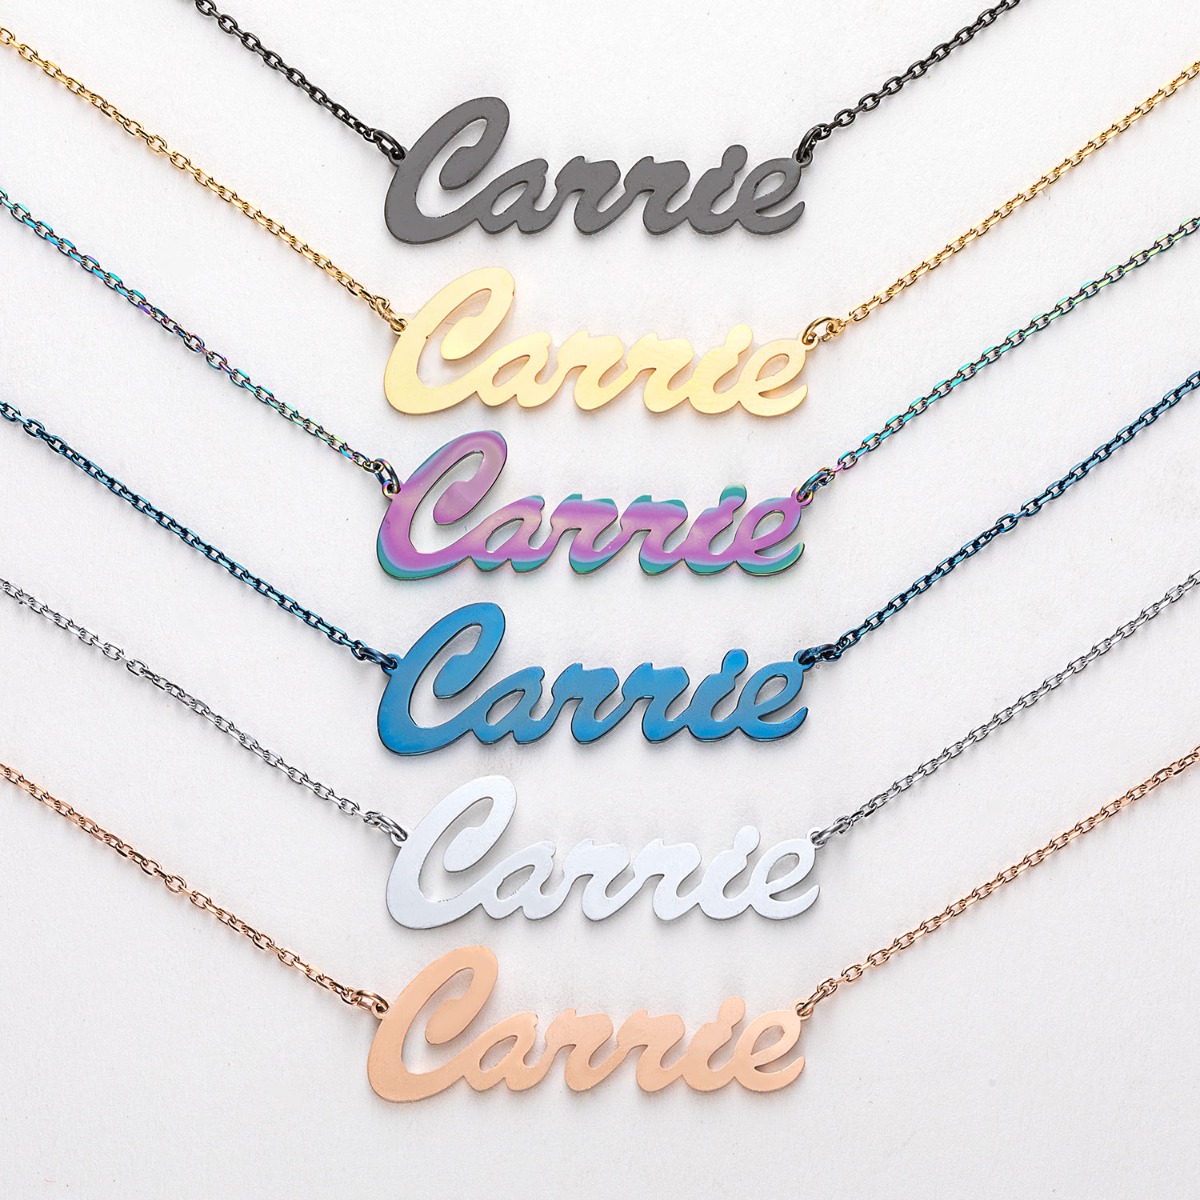 Stainless steel name necklace